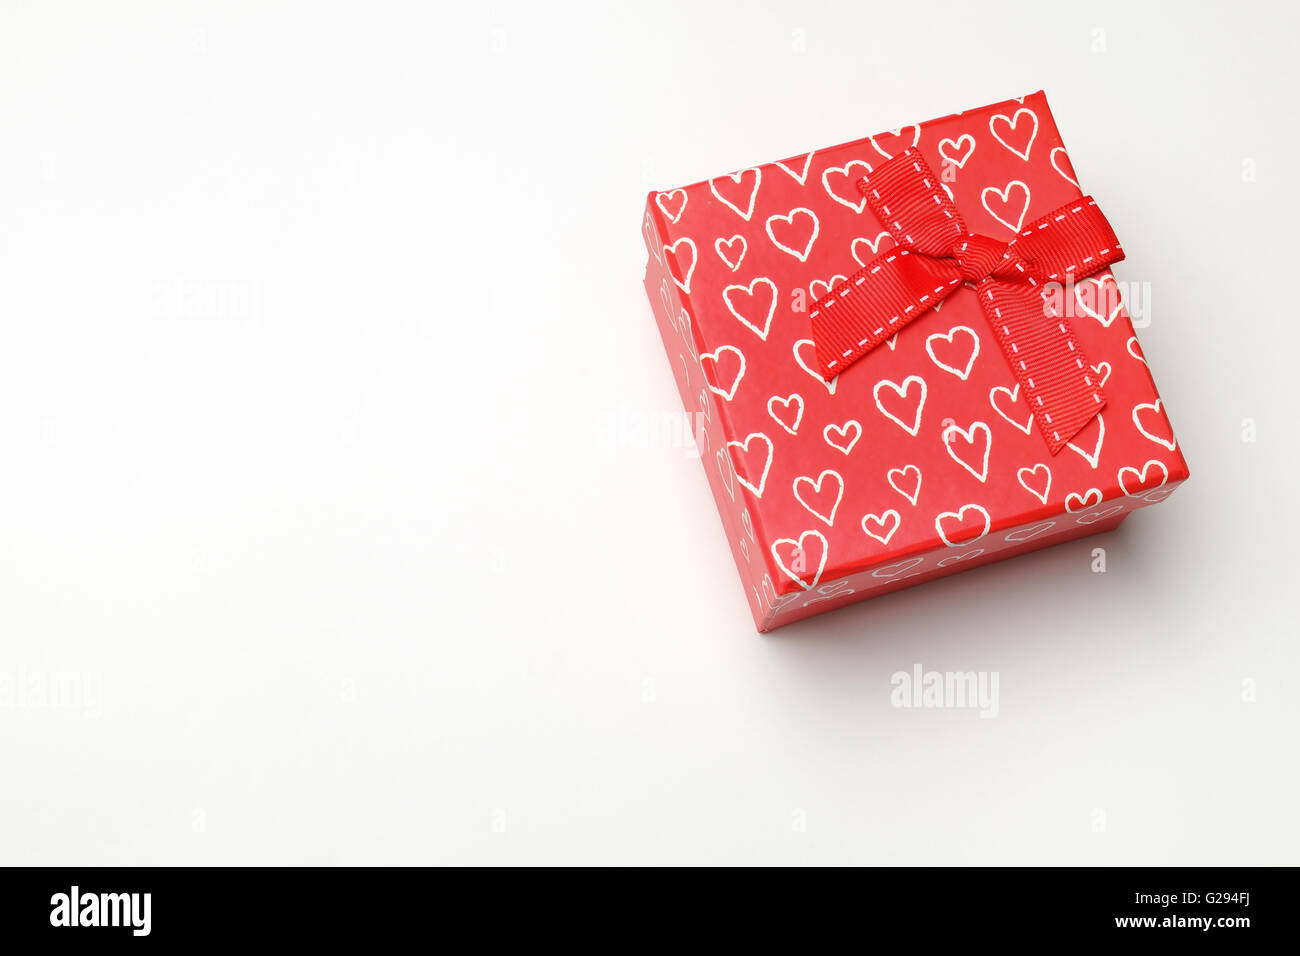 Decorative square red gift box with red ribbon and white painted hearts. Top perspective view. White isolated background. Stock Photo